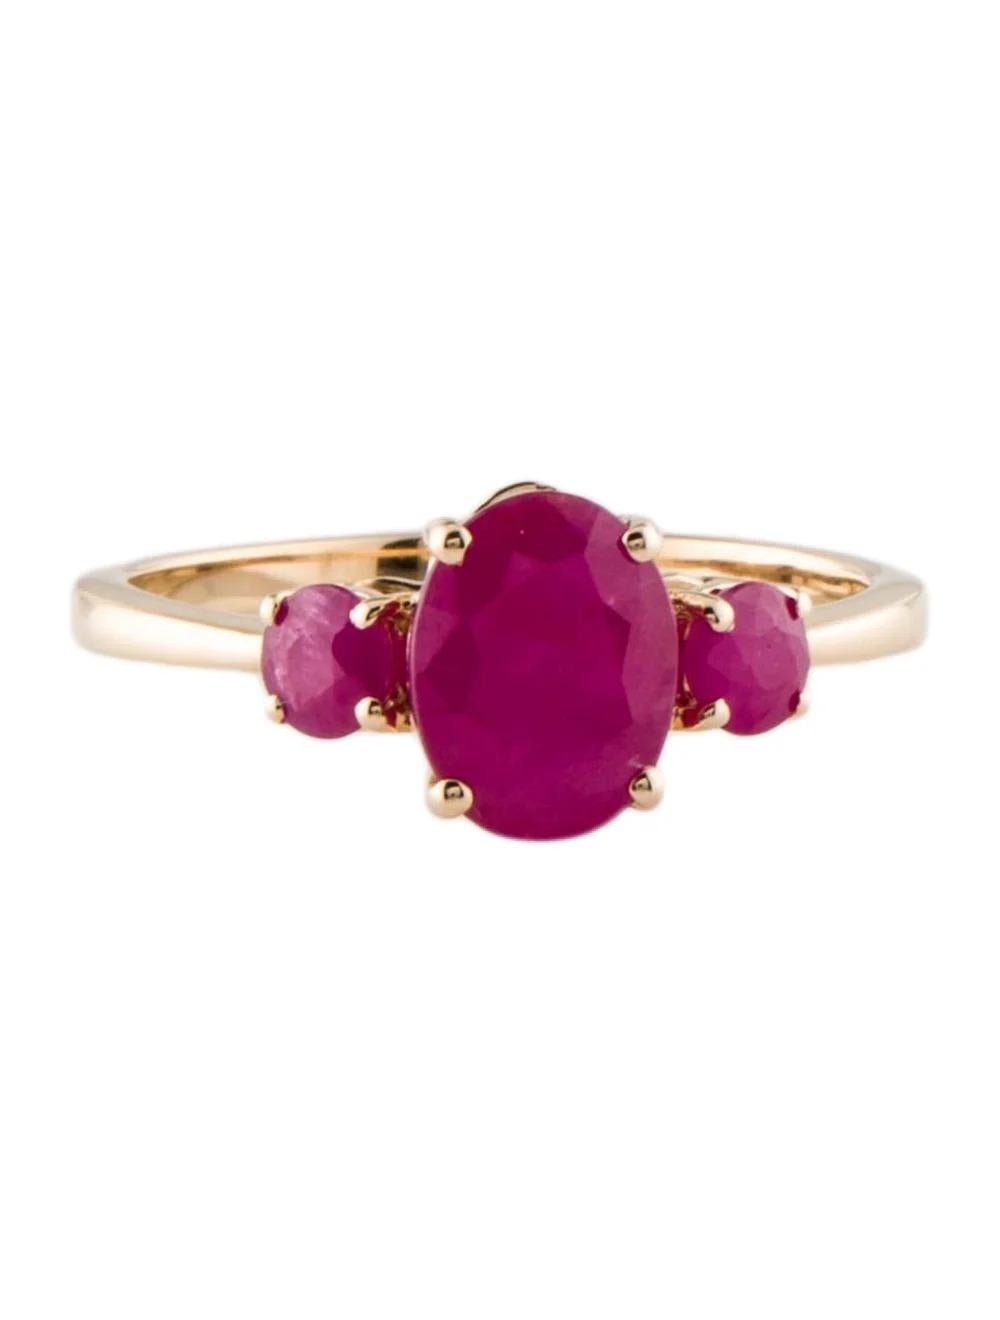 Oval Cut 14K Yellow Gold 1.31ct Ruby Cocktail Ring, Size 6.75: Timeless Elegance For Sale